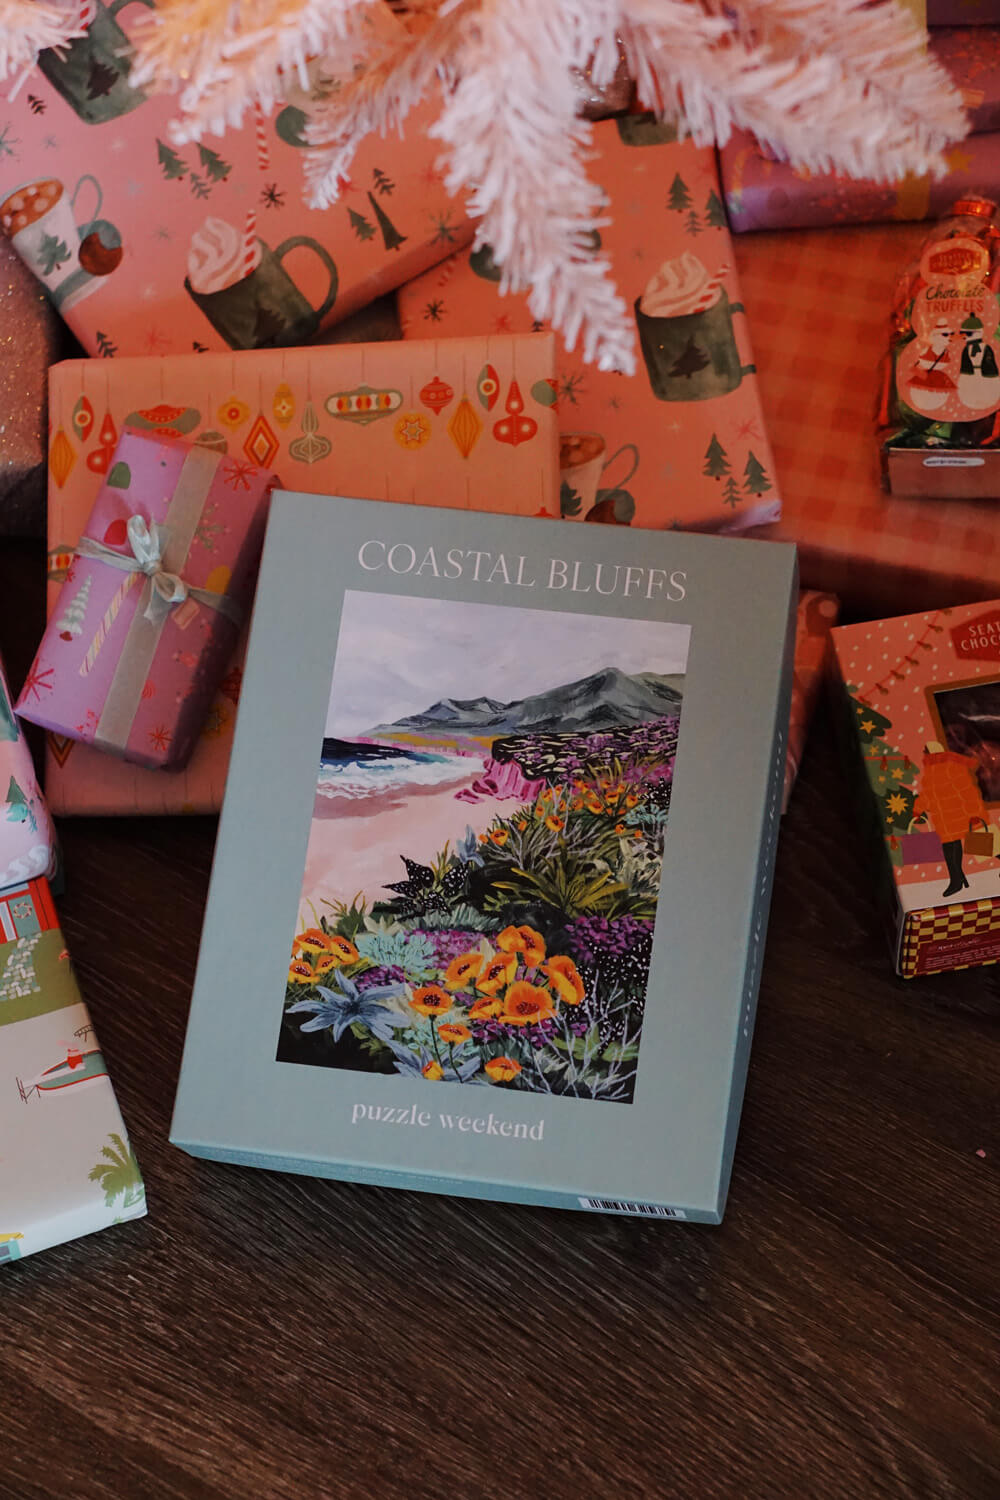 coastal bluffs puzzle weekend puzzle and christmas gift ideas with pretty wrapping paper